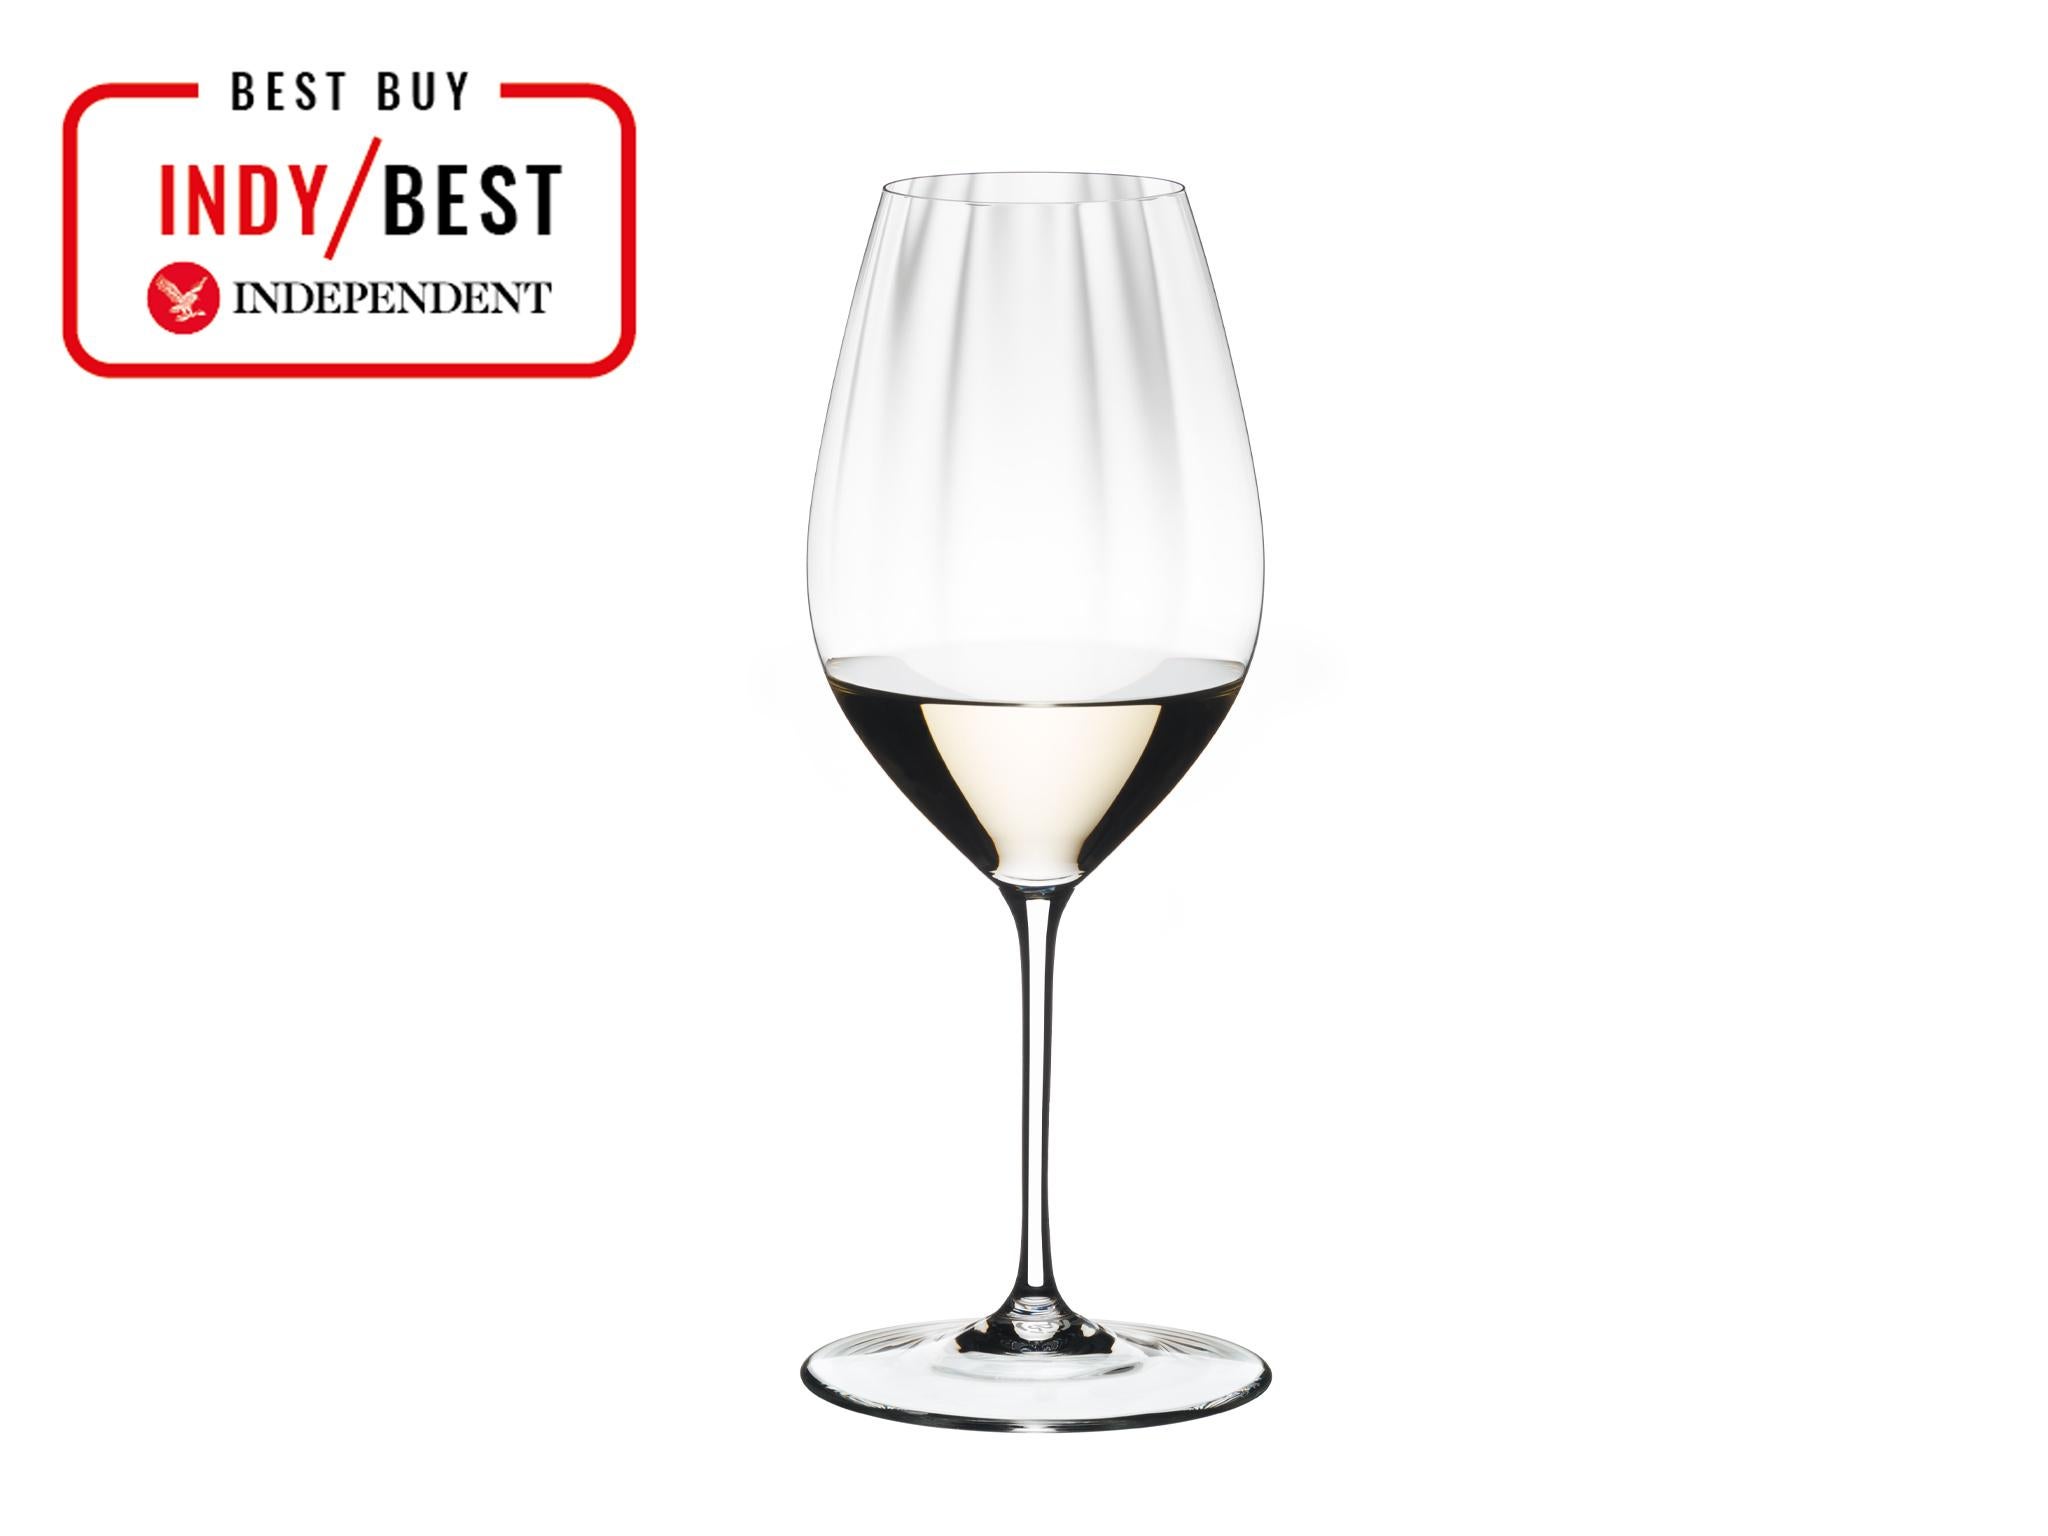 Sip your alcohol-free wine from a wine glass that will help ensure the taste is just as good